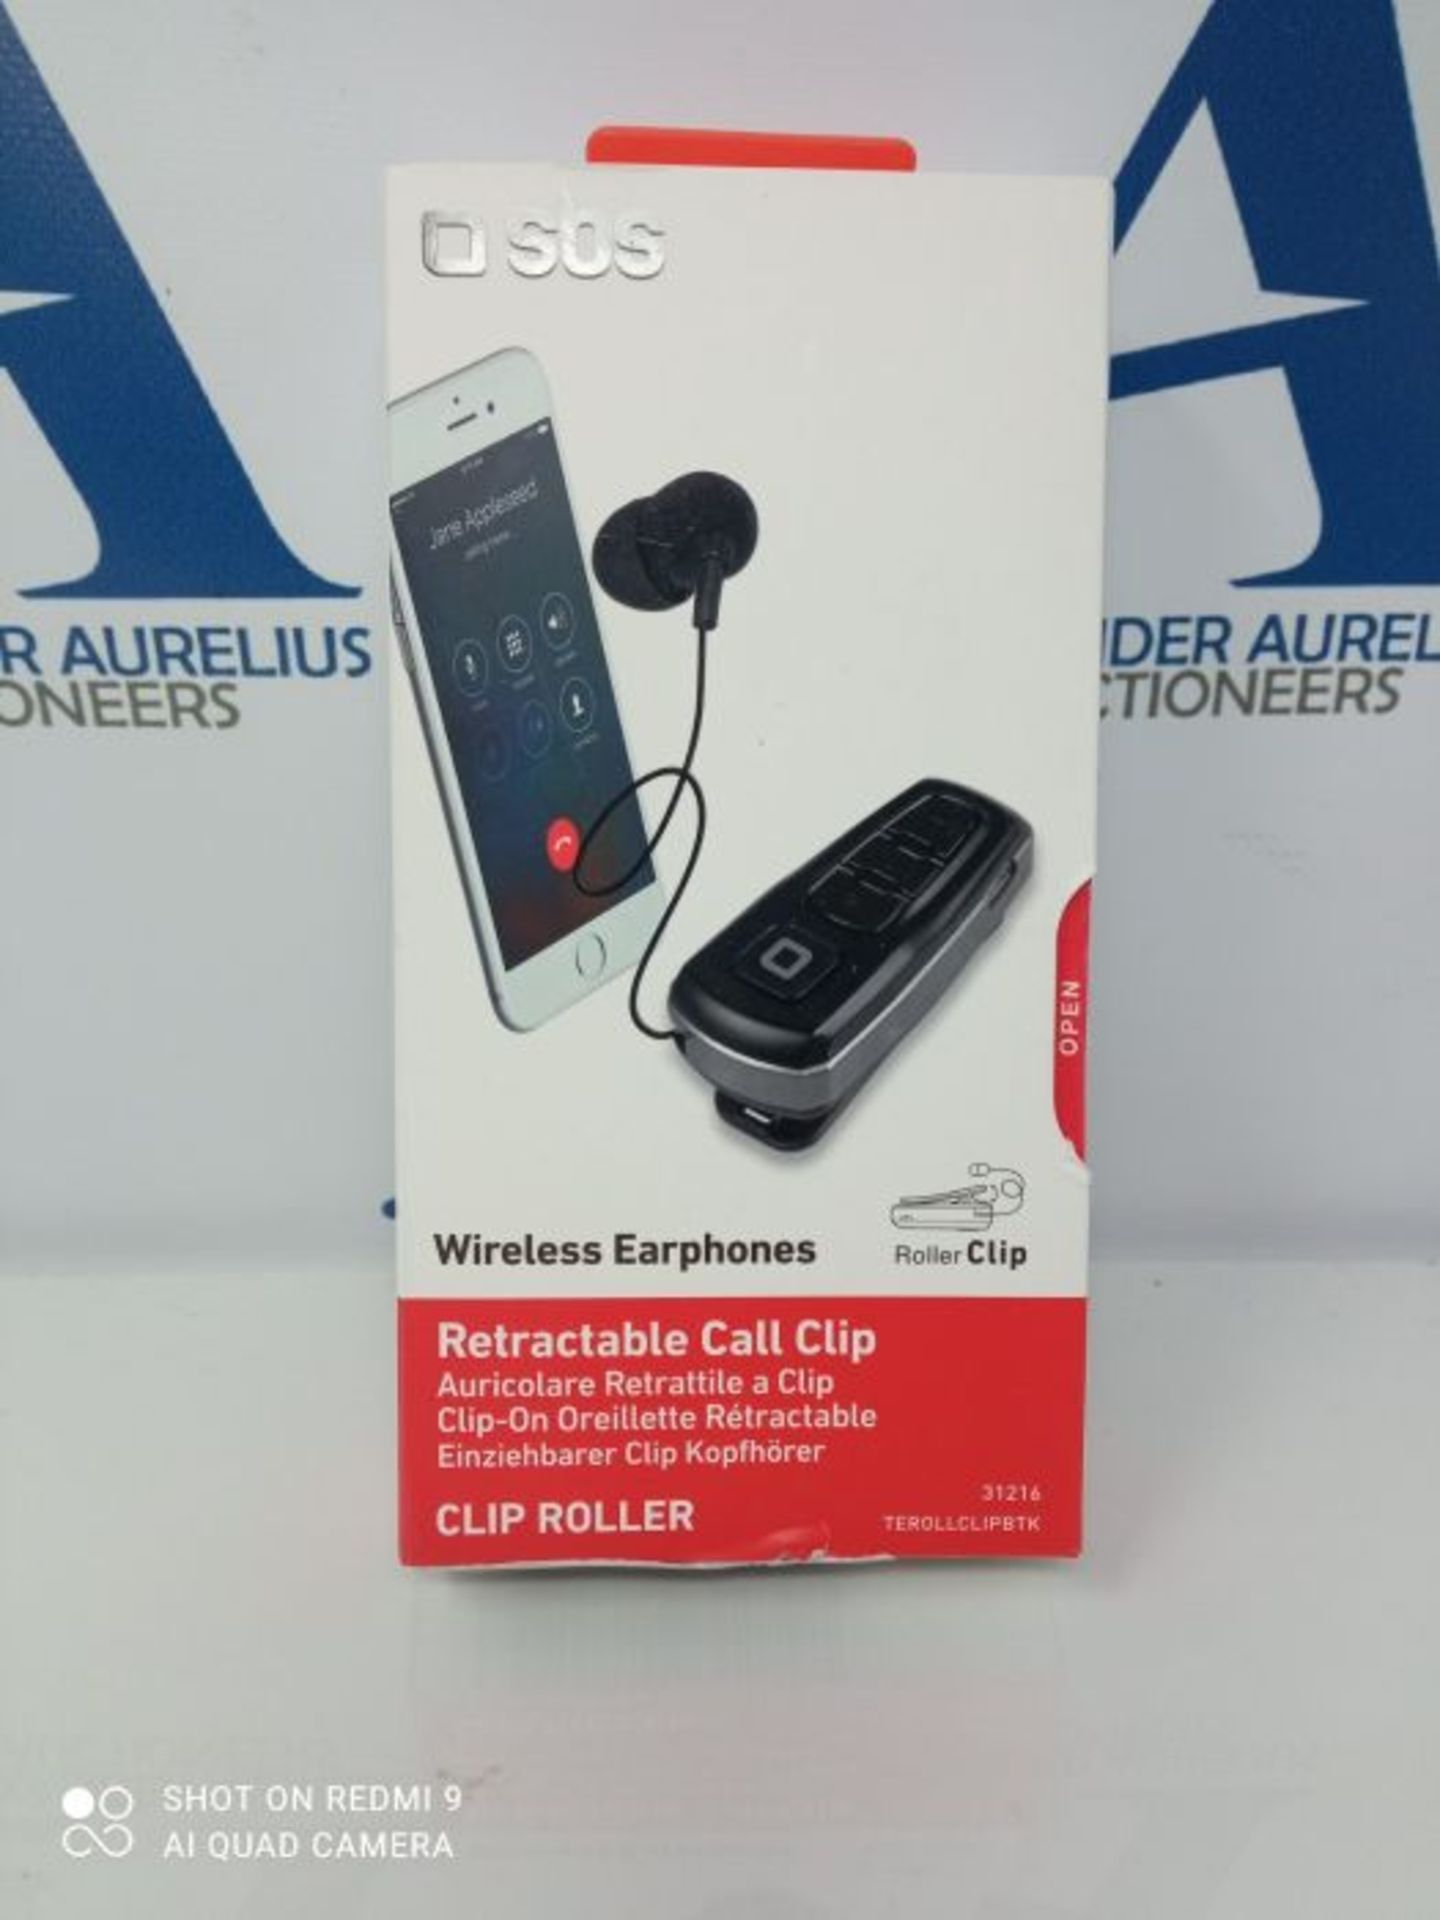 SBS Bluetooth Headset with Clip and Roll-up Wire Multipoint Technology to connect 2 de